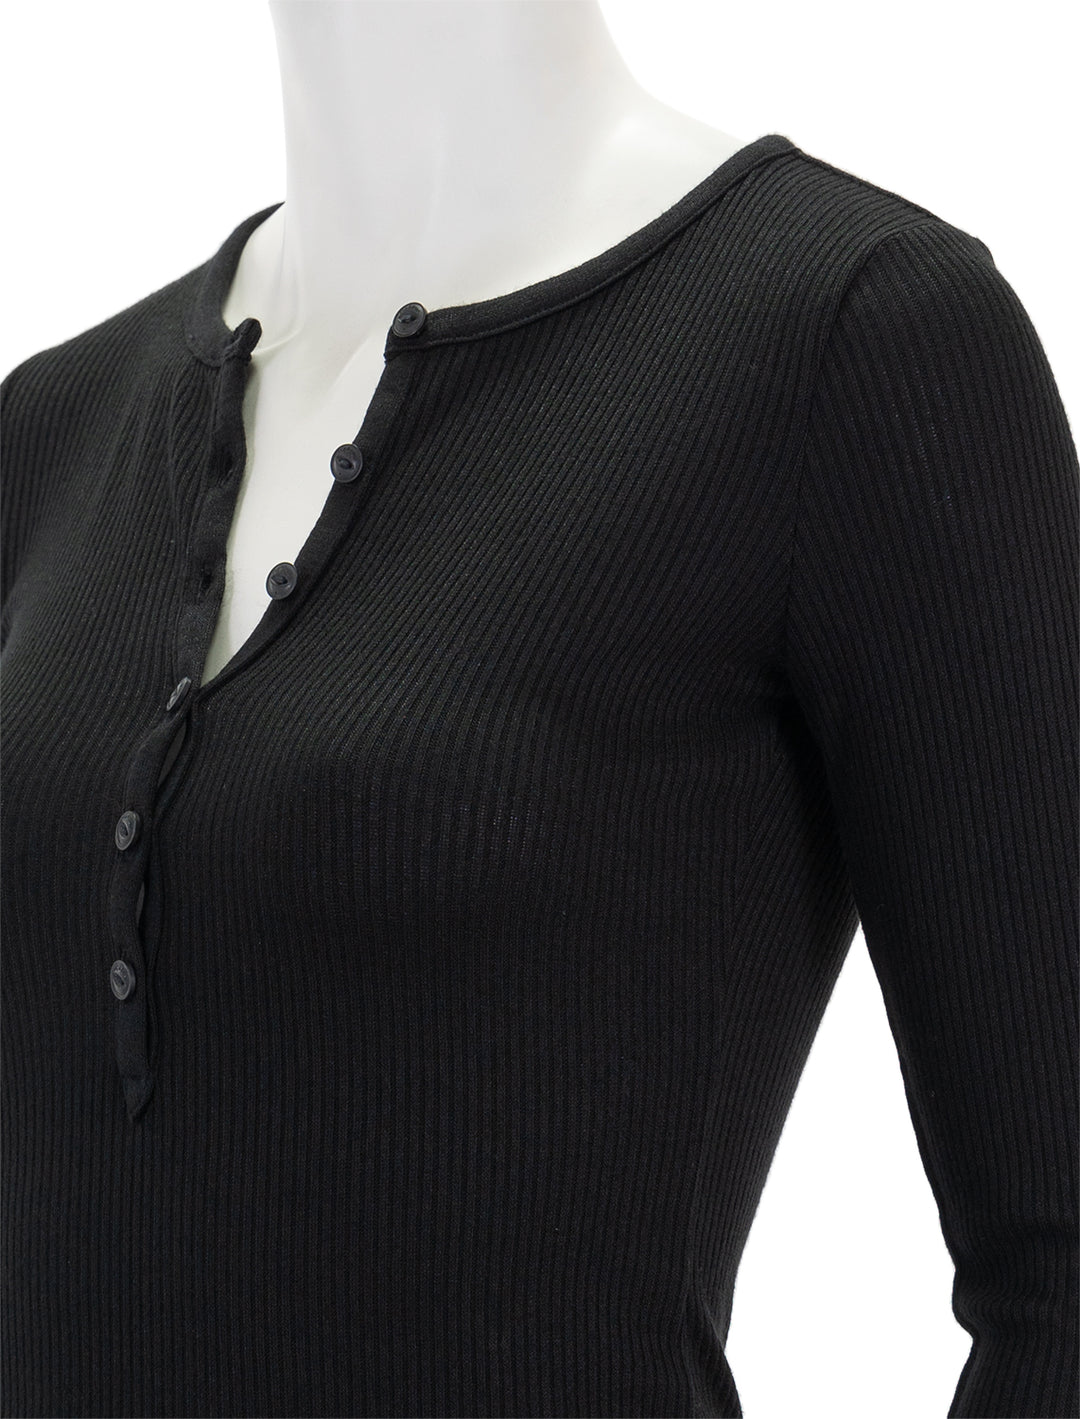 Close-up view of Rag & Bone's the knit rib henley in black.